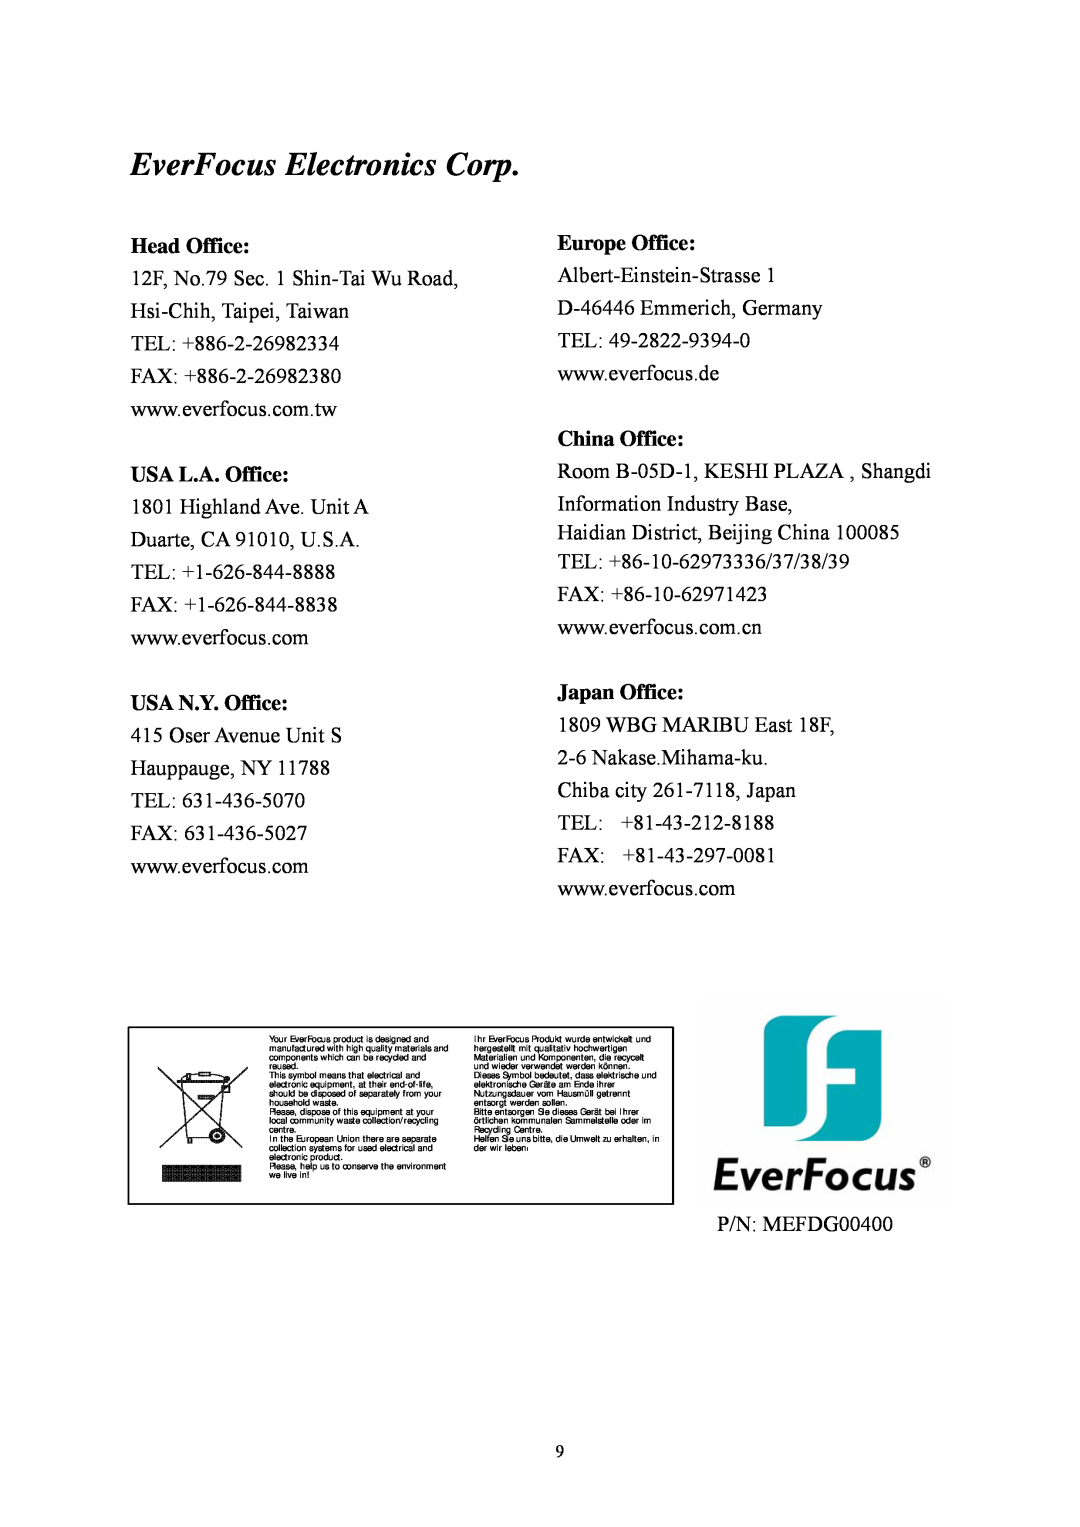 EverFocus EFD300 specifications Head Office, USA L.A. Office, USA N.Y. Office, Europe Office, China Office, Japan Office 